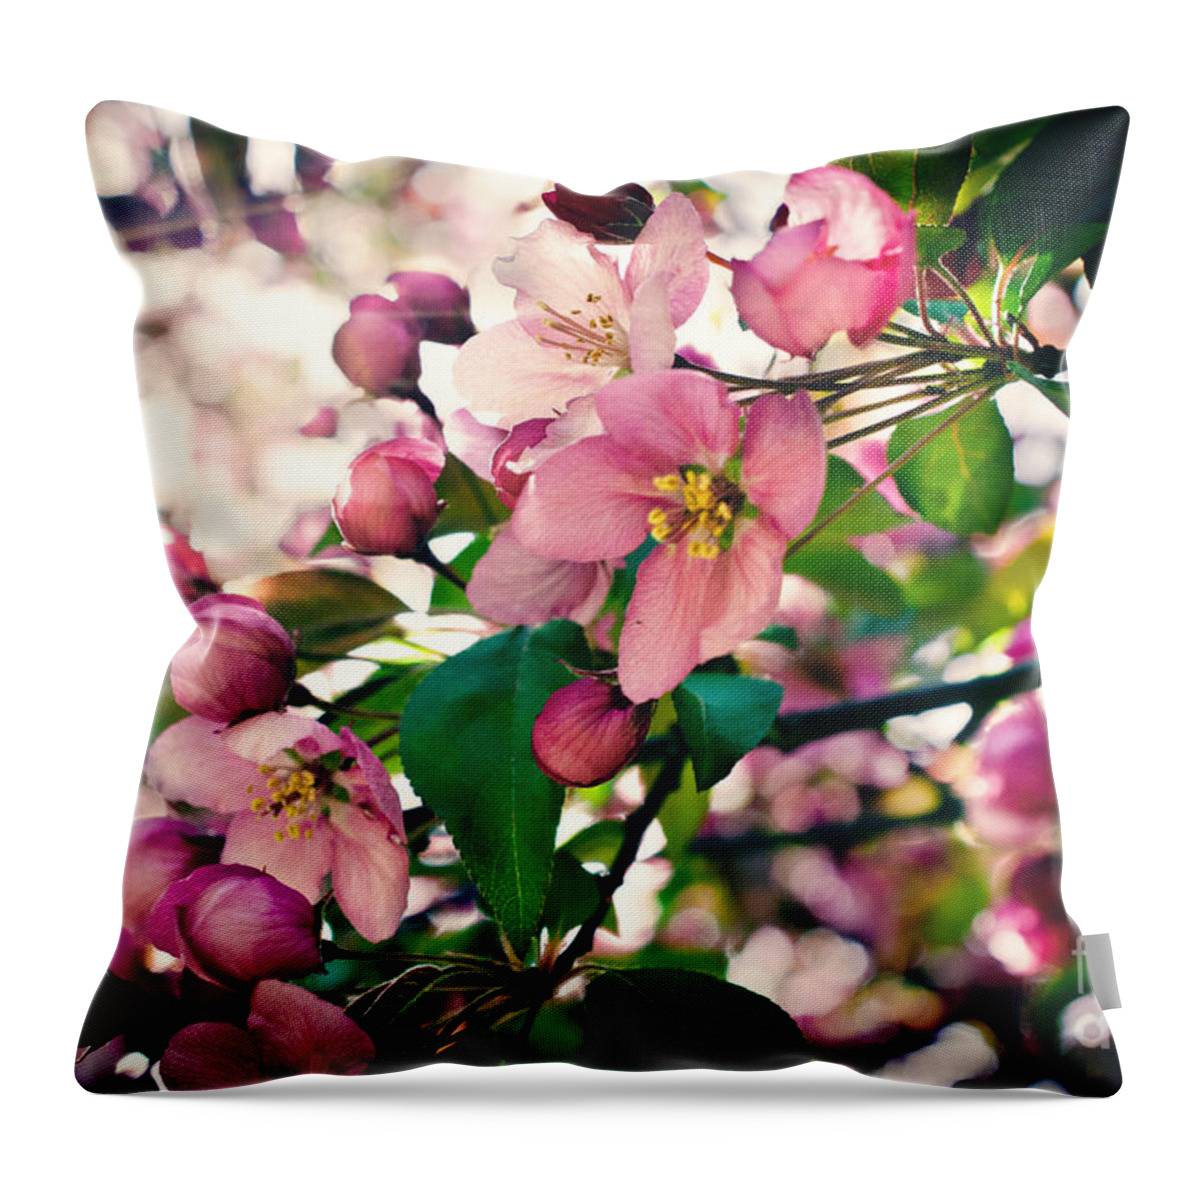 Cherry Blossom Throw Pillow featuring the photograph Cherry Blossom by Gwen Gibson